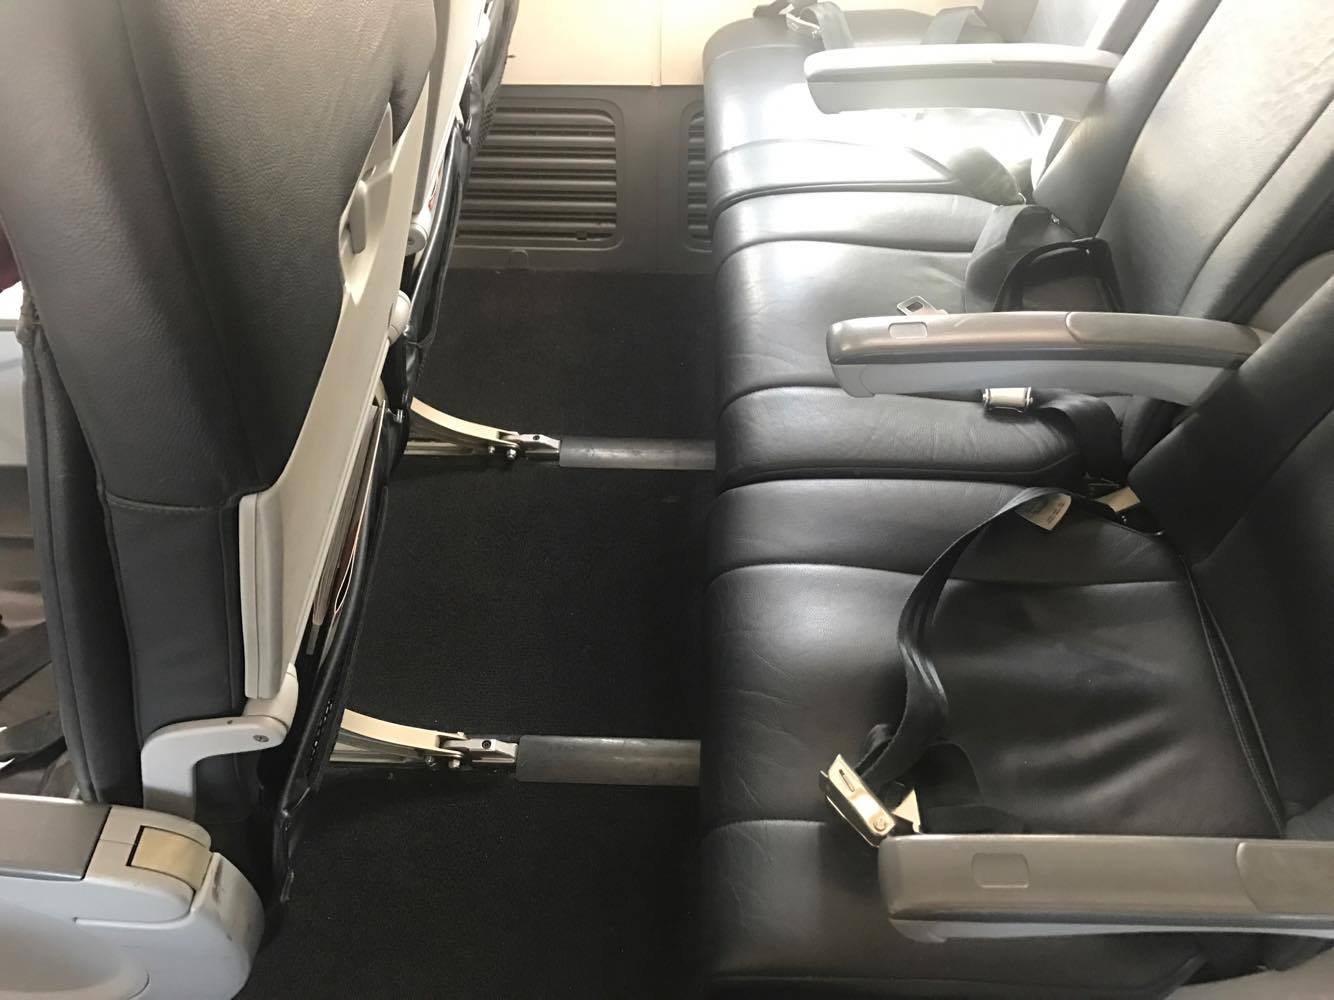 seat in a plane with seats